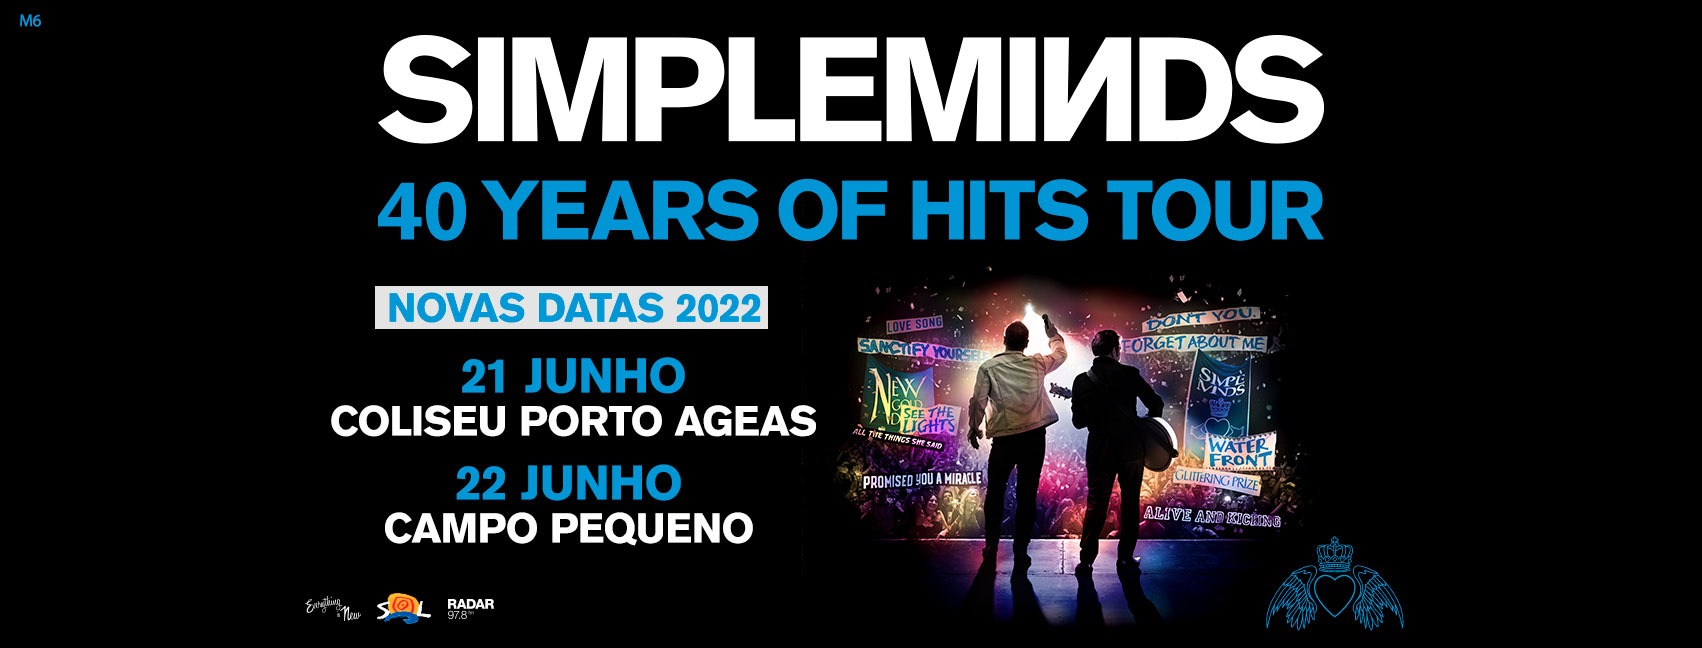 https://ticketline.sapo.pt/evento/simple-minds-40-years-of-hits-tour-49950